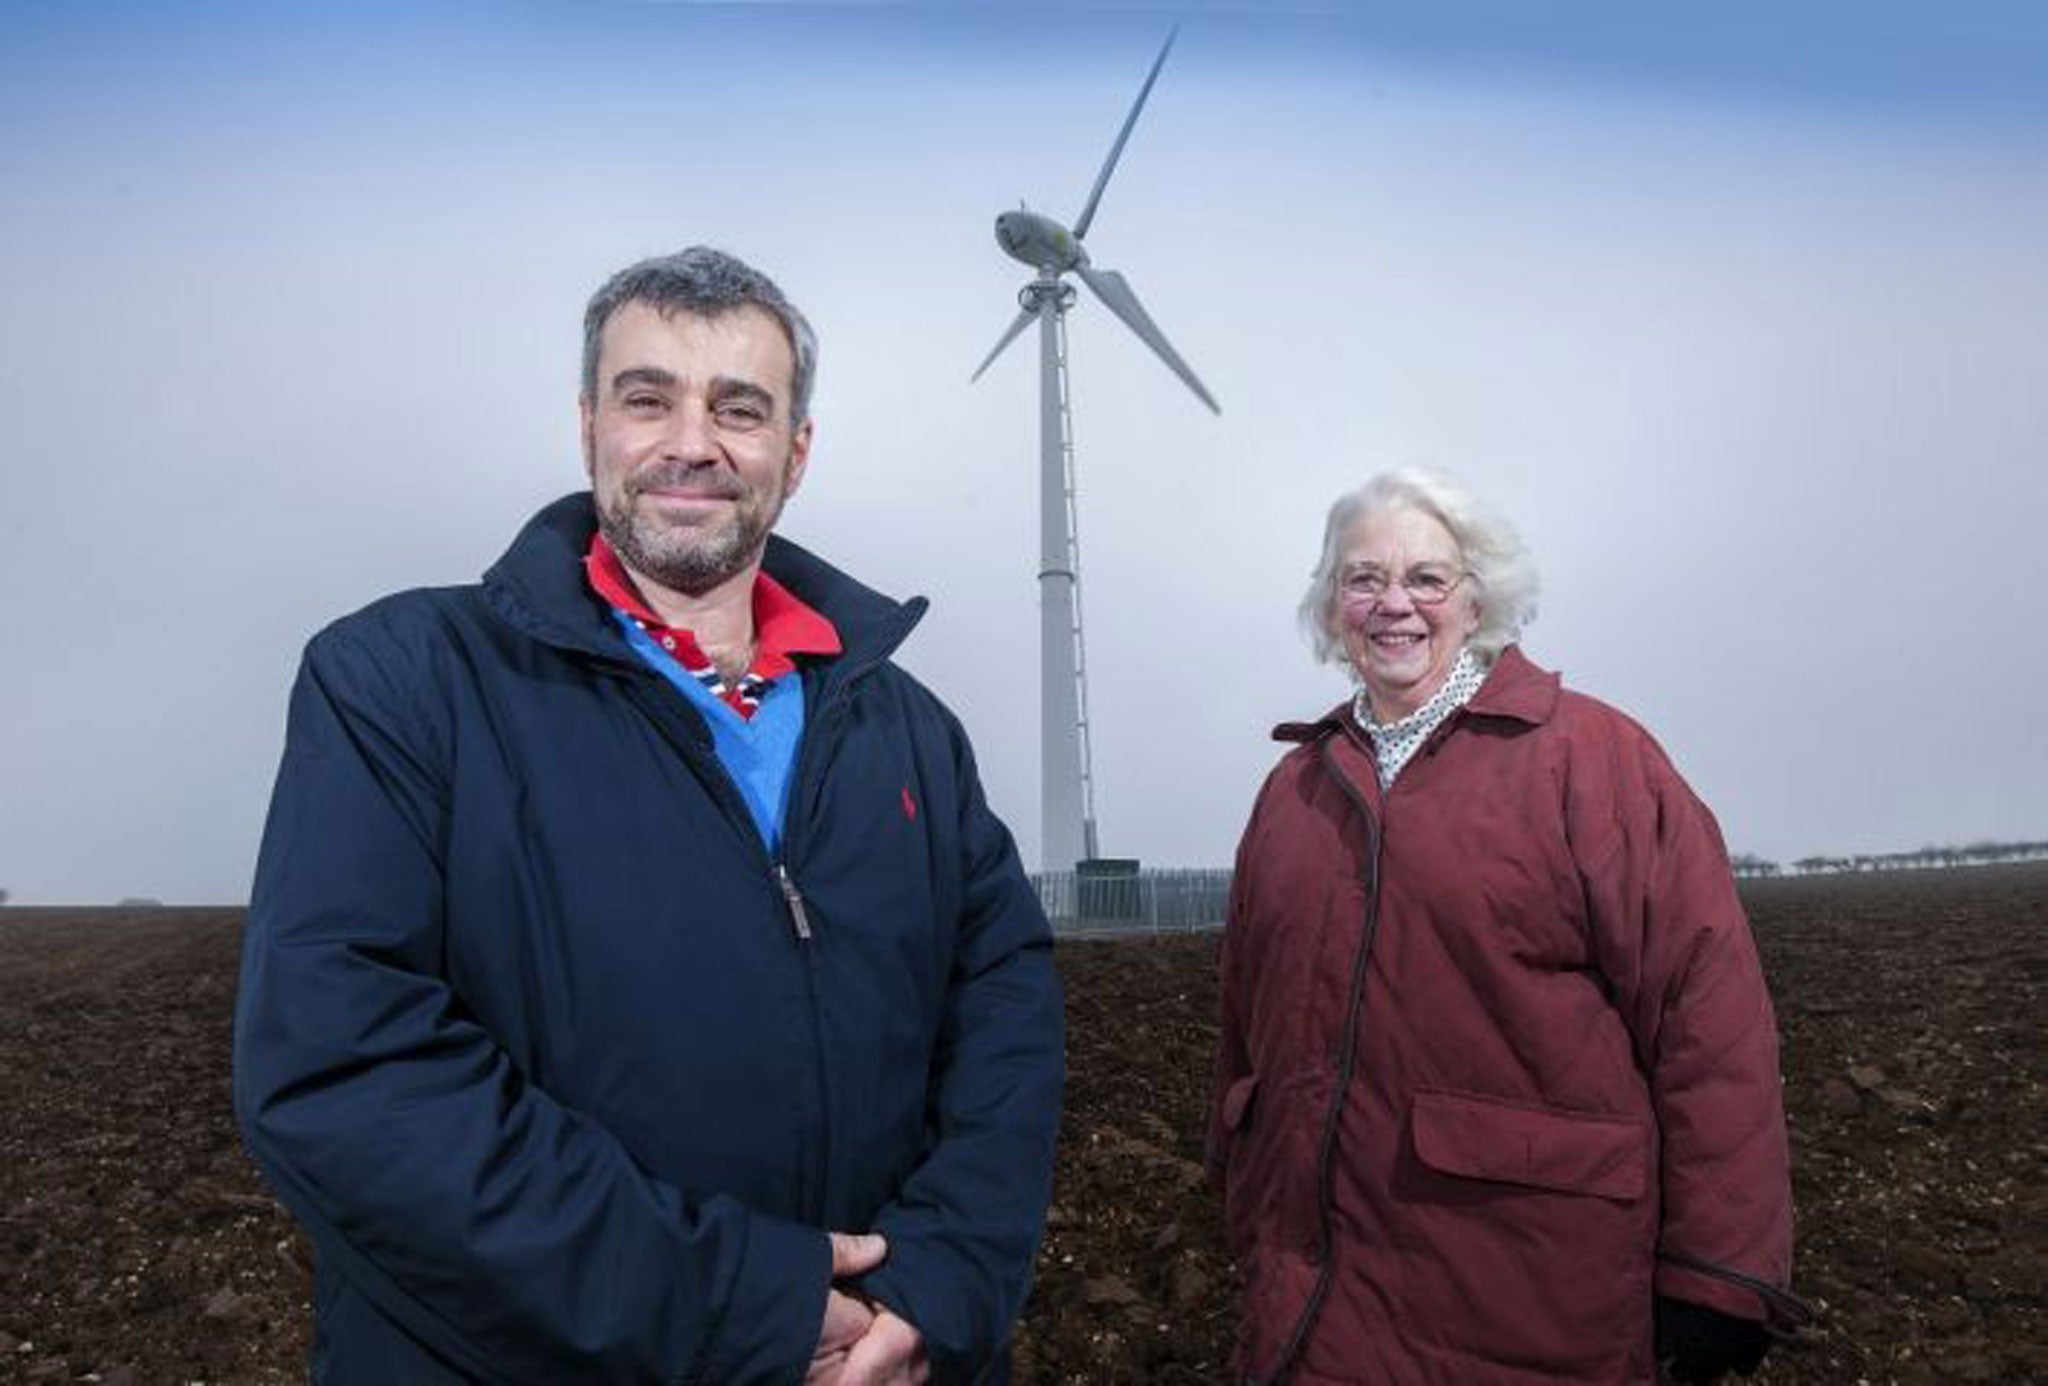 Farmer Guy Benson and his mother Pauline see their turbine as a 'scenic acquisition'